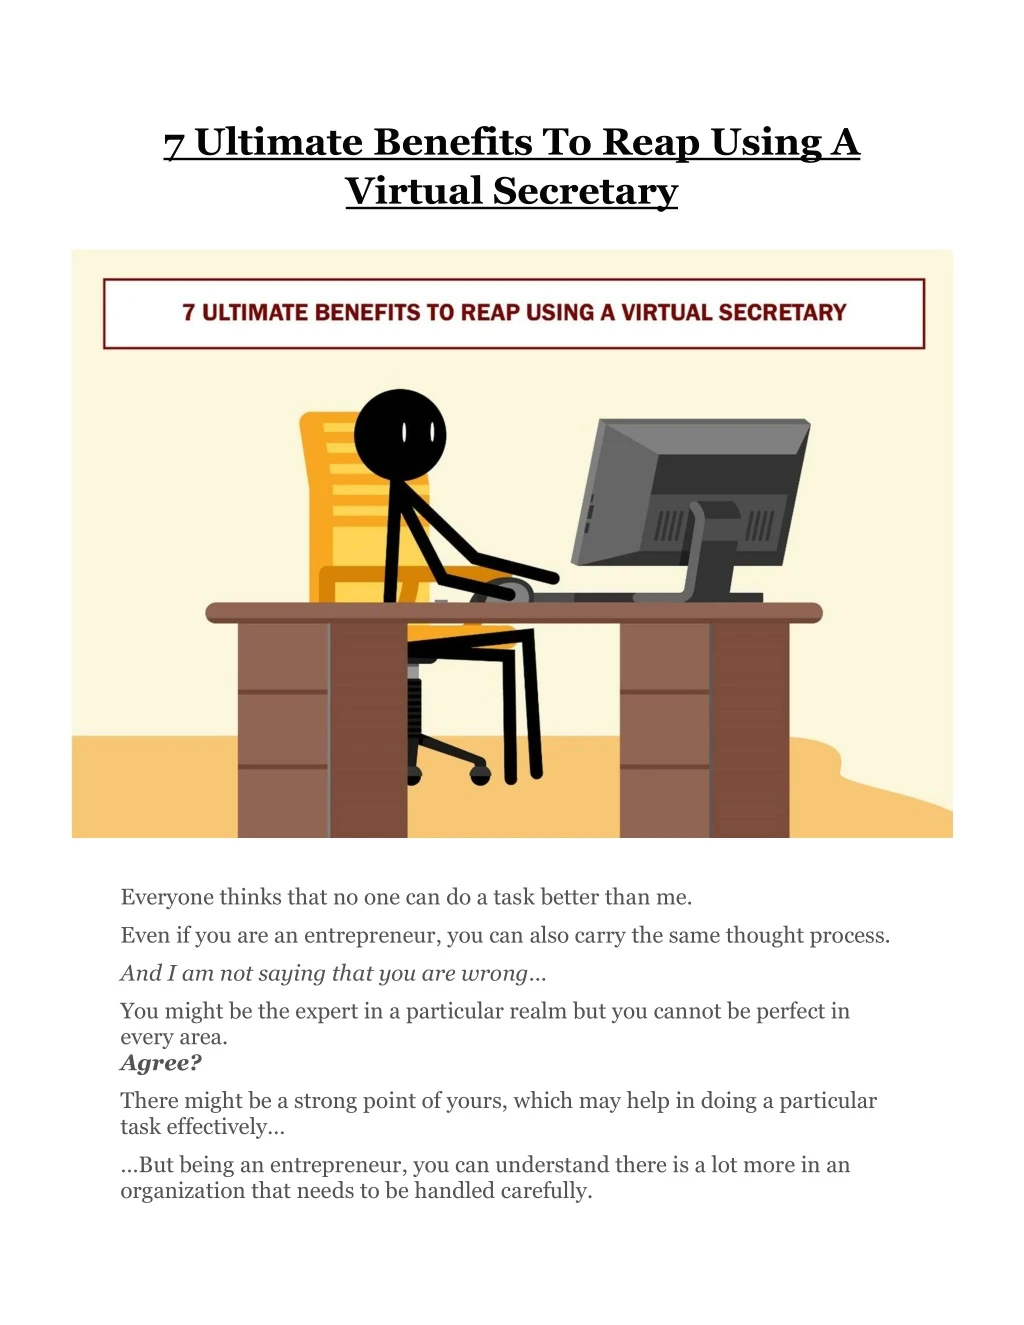 7 ultimate benefits to reap using a virtual